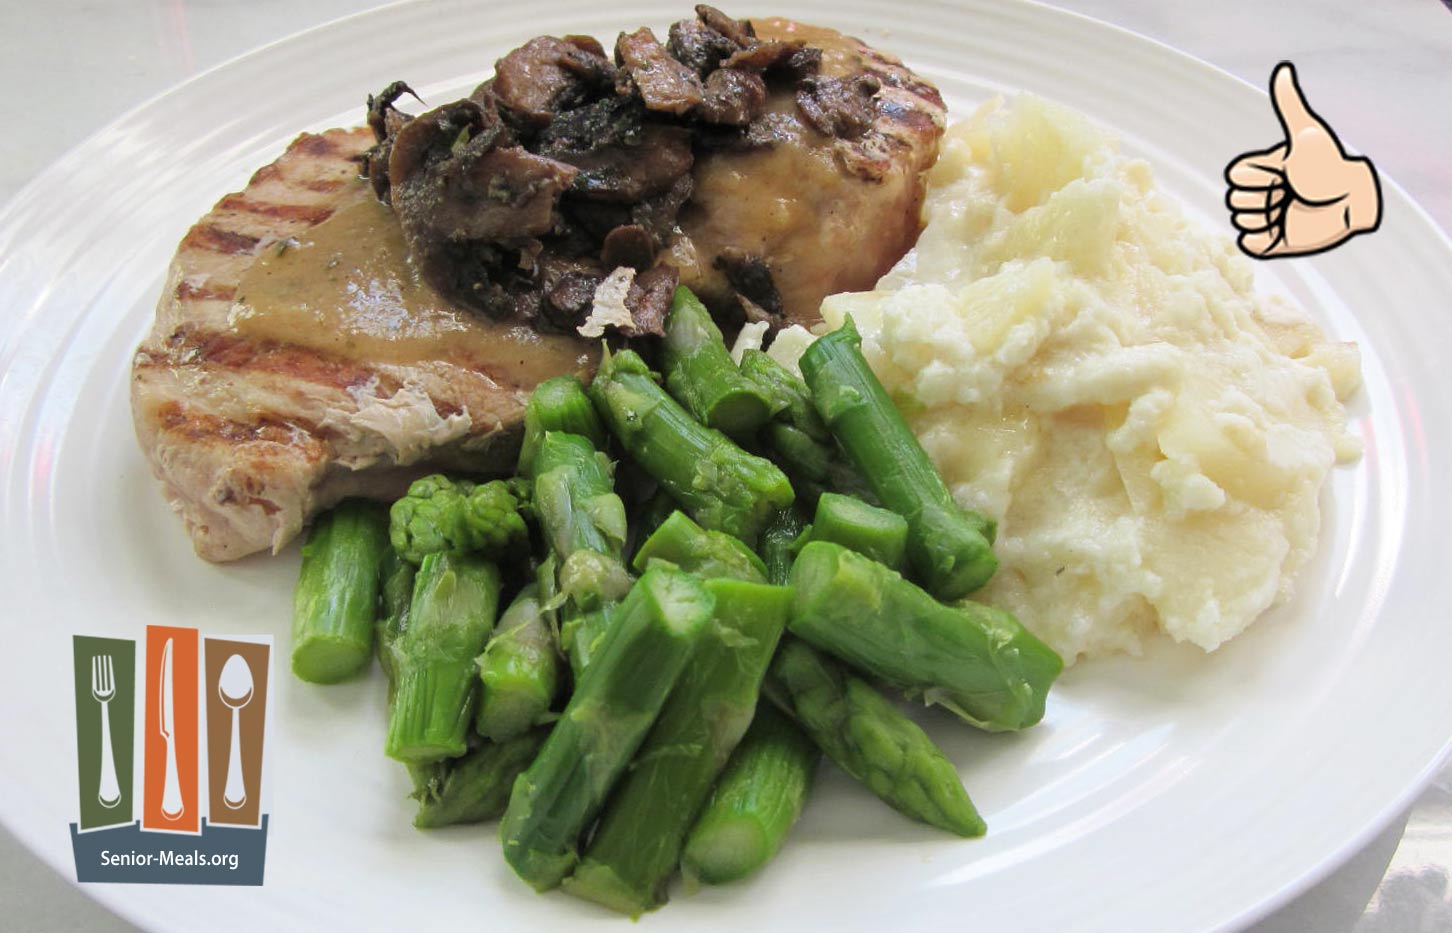 Grilled Pork Chops with Sauteed Mushrooms, Mashed Potatoes and Asparagus Cuts - $12